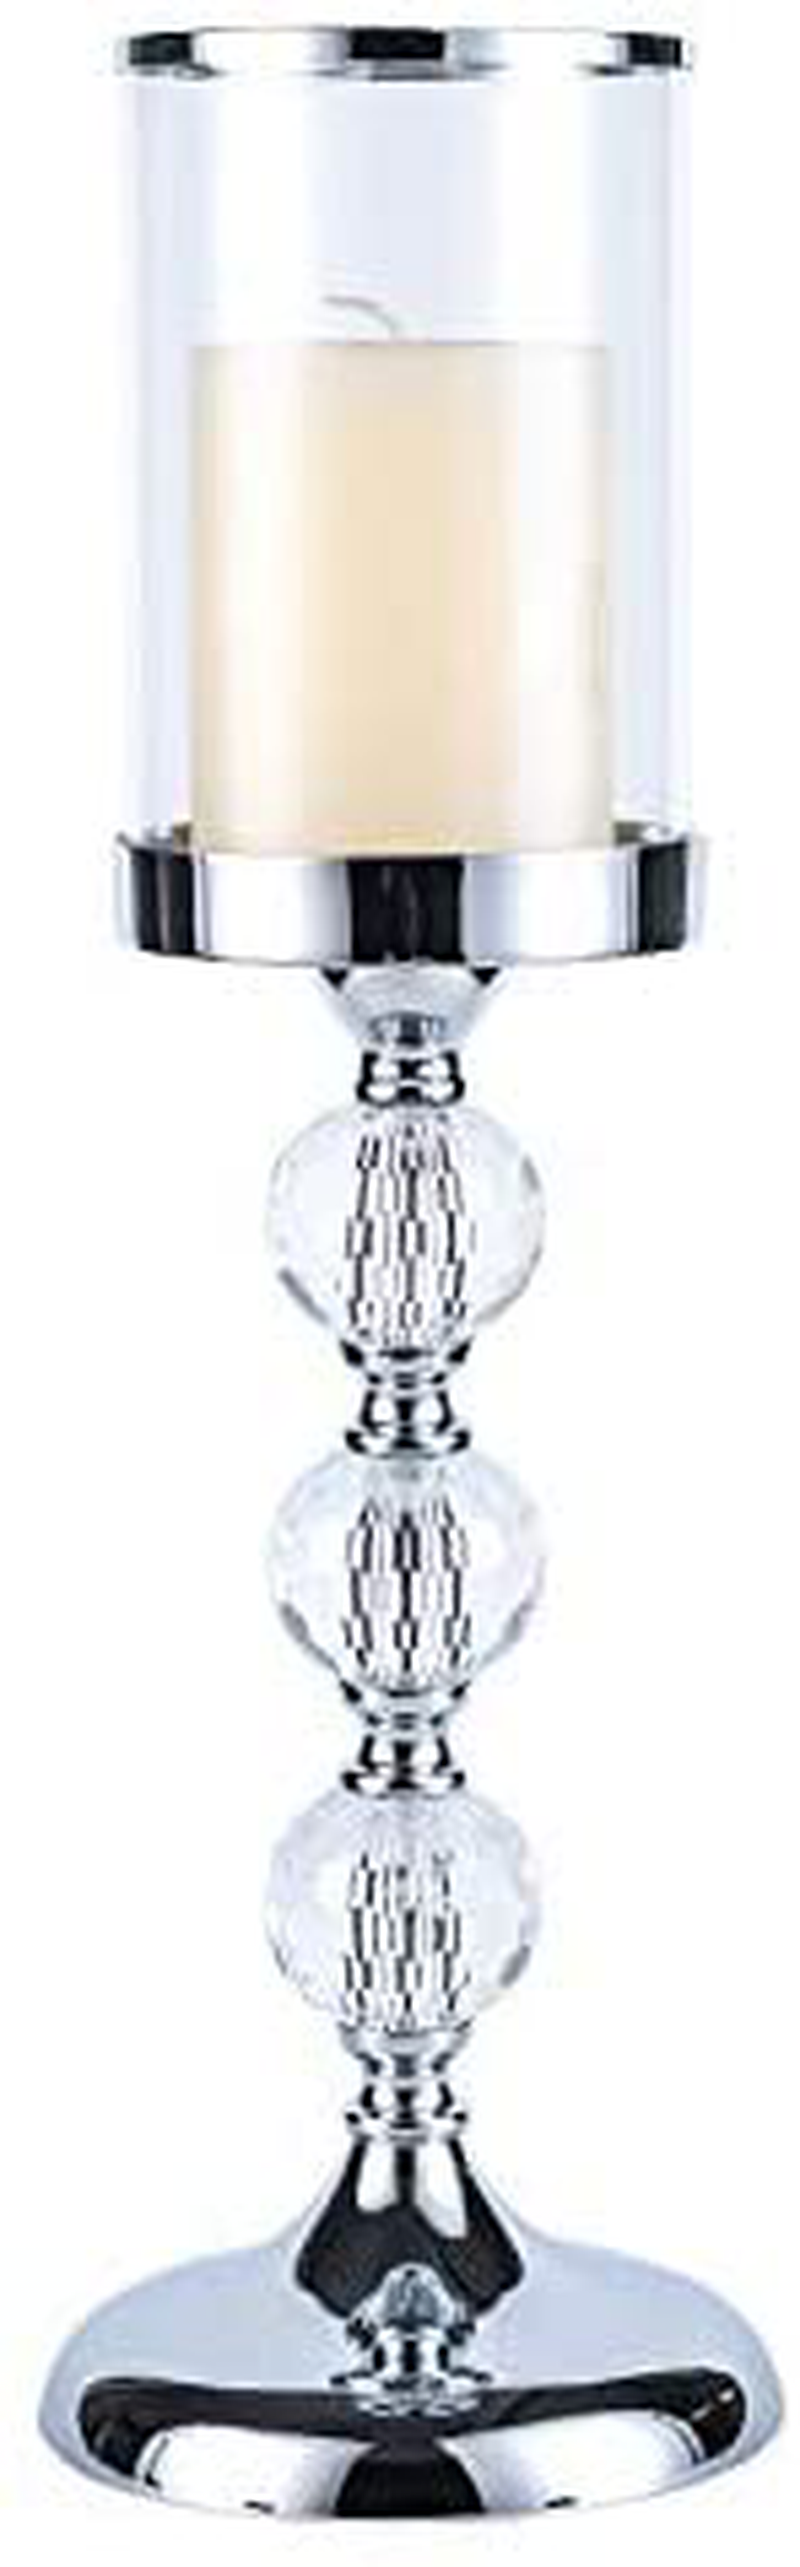 Pillar Candle Holder with Lid,Candle Holder for Pillar Candle, Candlestick Holder with Crystal Balls for Coffee Dining Table, Wedding, Christmas, Halloween, Home Decor CH065M Home & Garden > Decor > Home Fragrance Accessories > Candle Holders Hanjue 3 crystal balls  